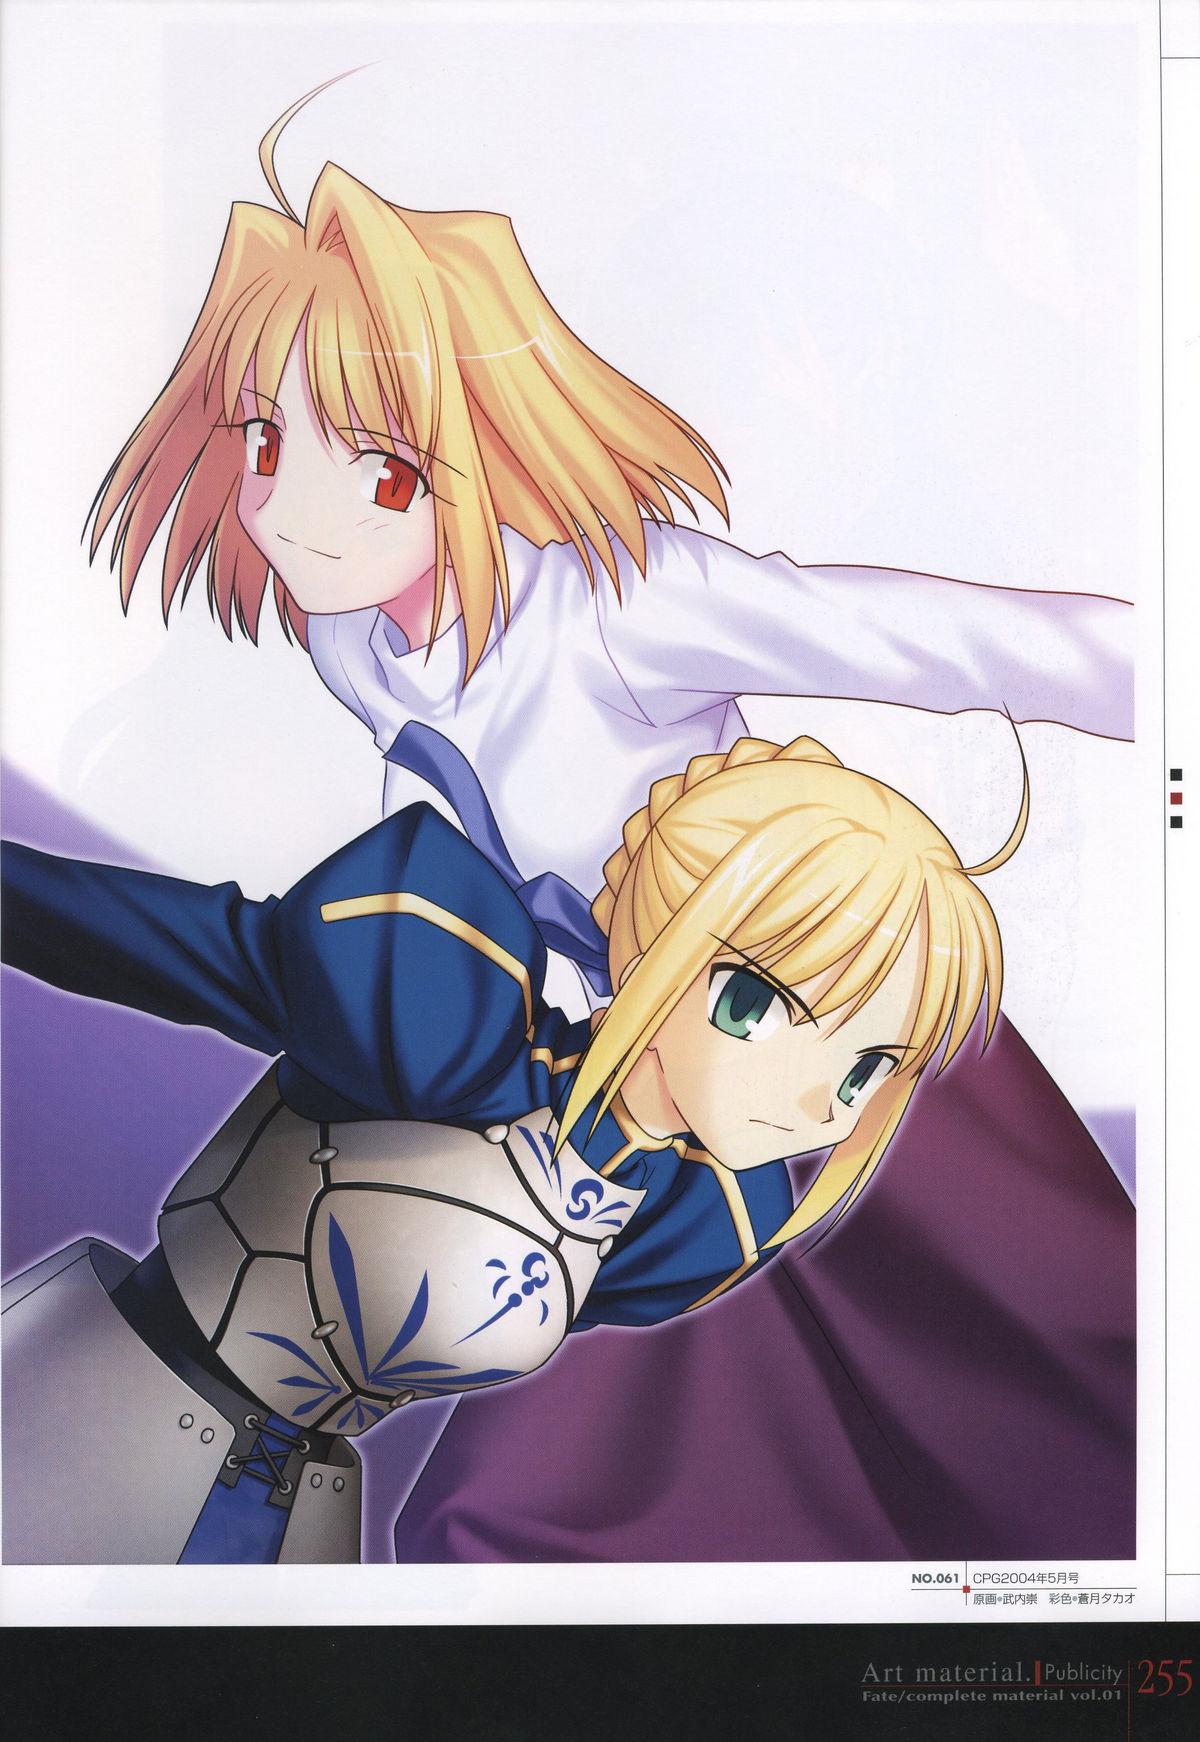 Fate/complete material I - Art material. 259